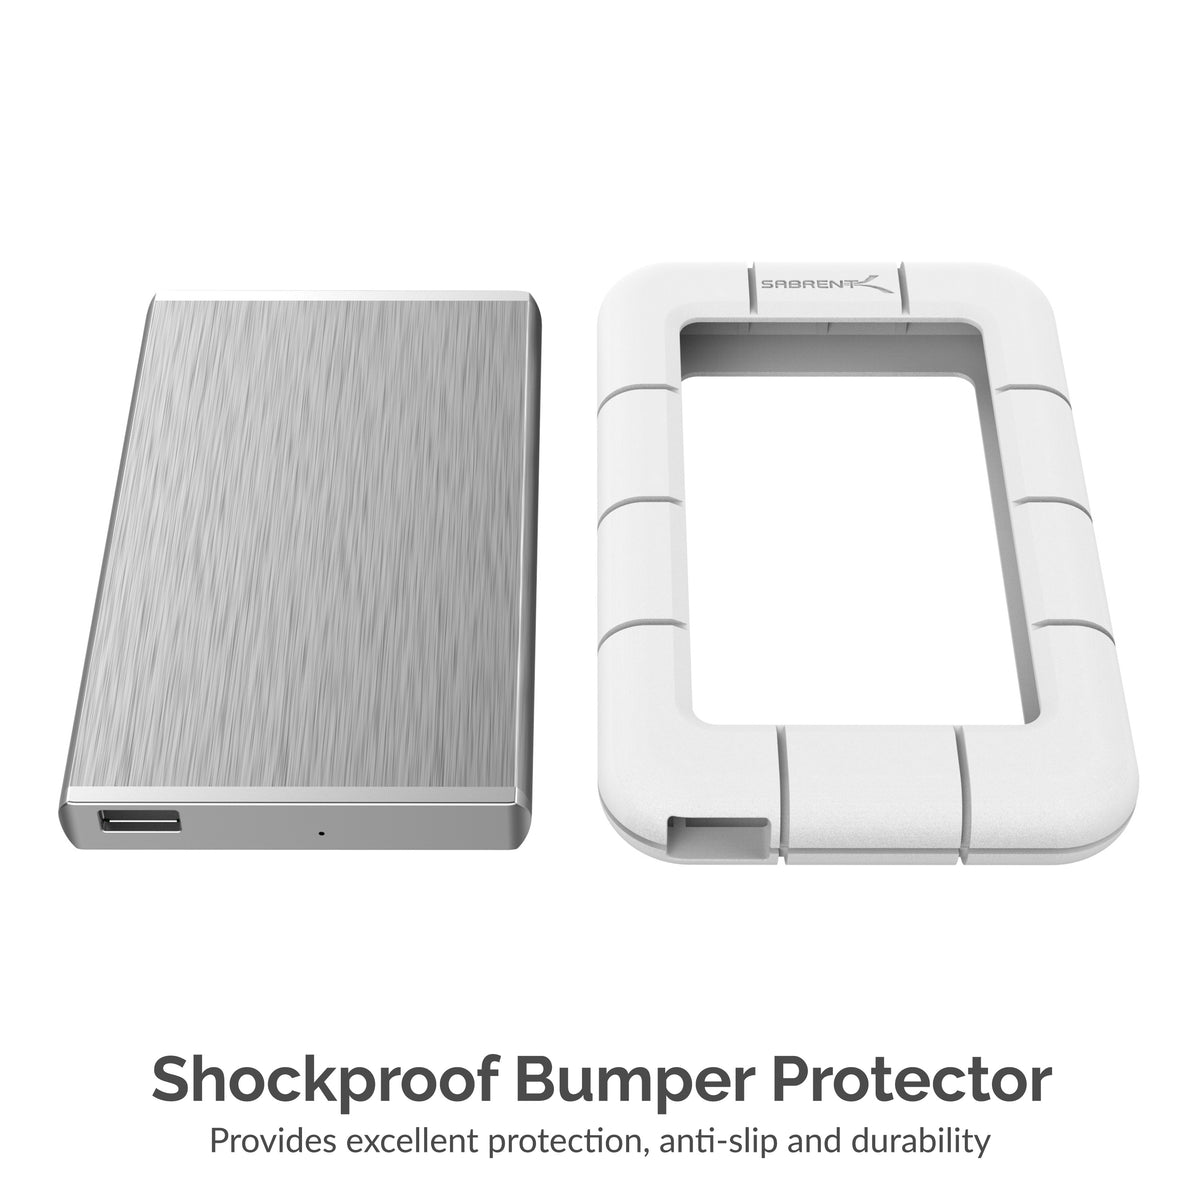 USB 2.0 to 2.5-Inch SATA/SSD External Shockproof Aluminum Hard Drive Enclosure White/Silver